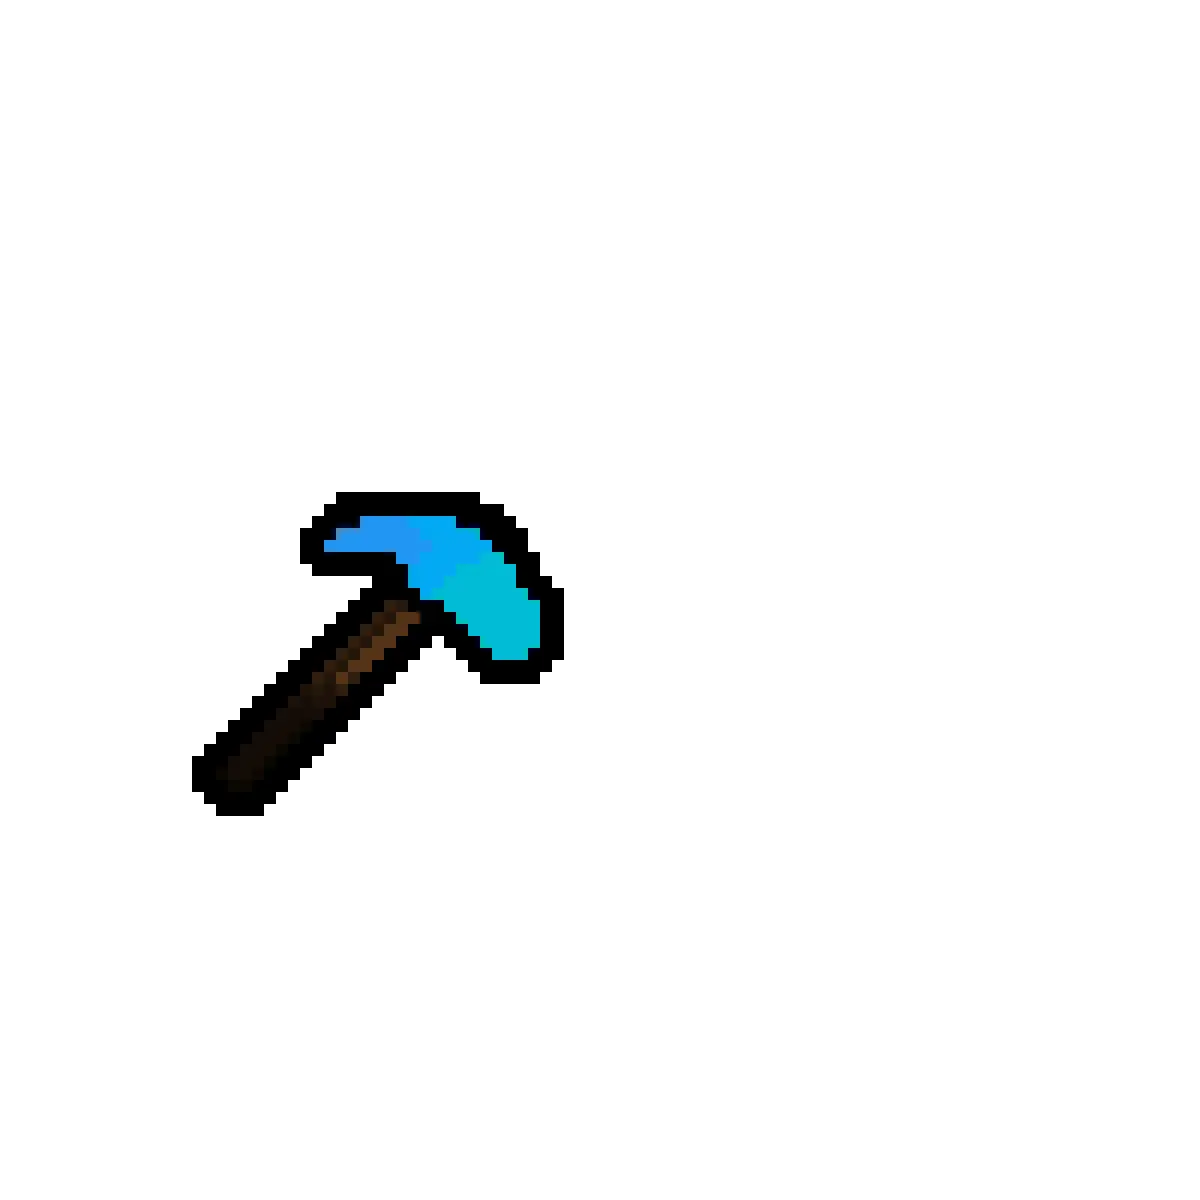 Download Diamond Pickaxe Png Image With Clown Space Station 13 Diamond Pickaxe Png